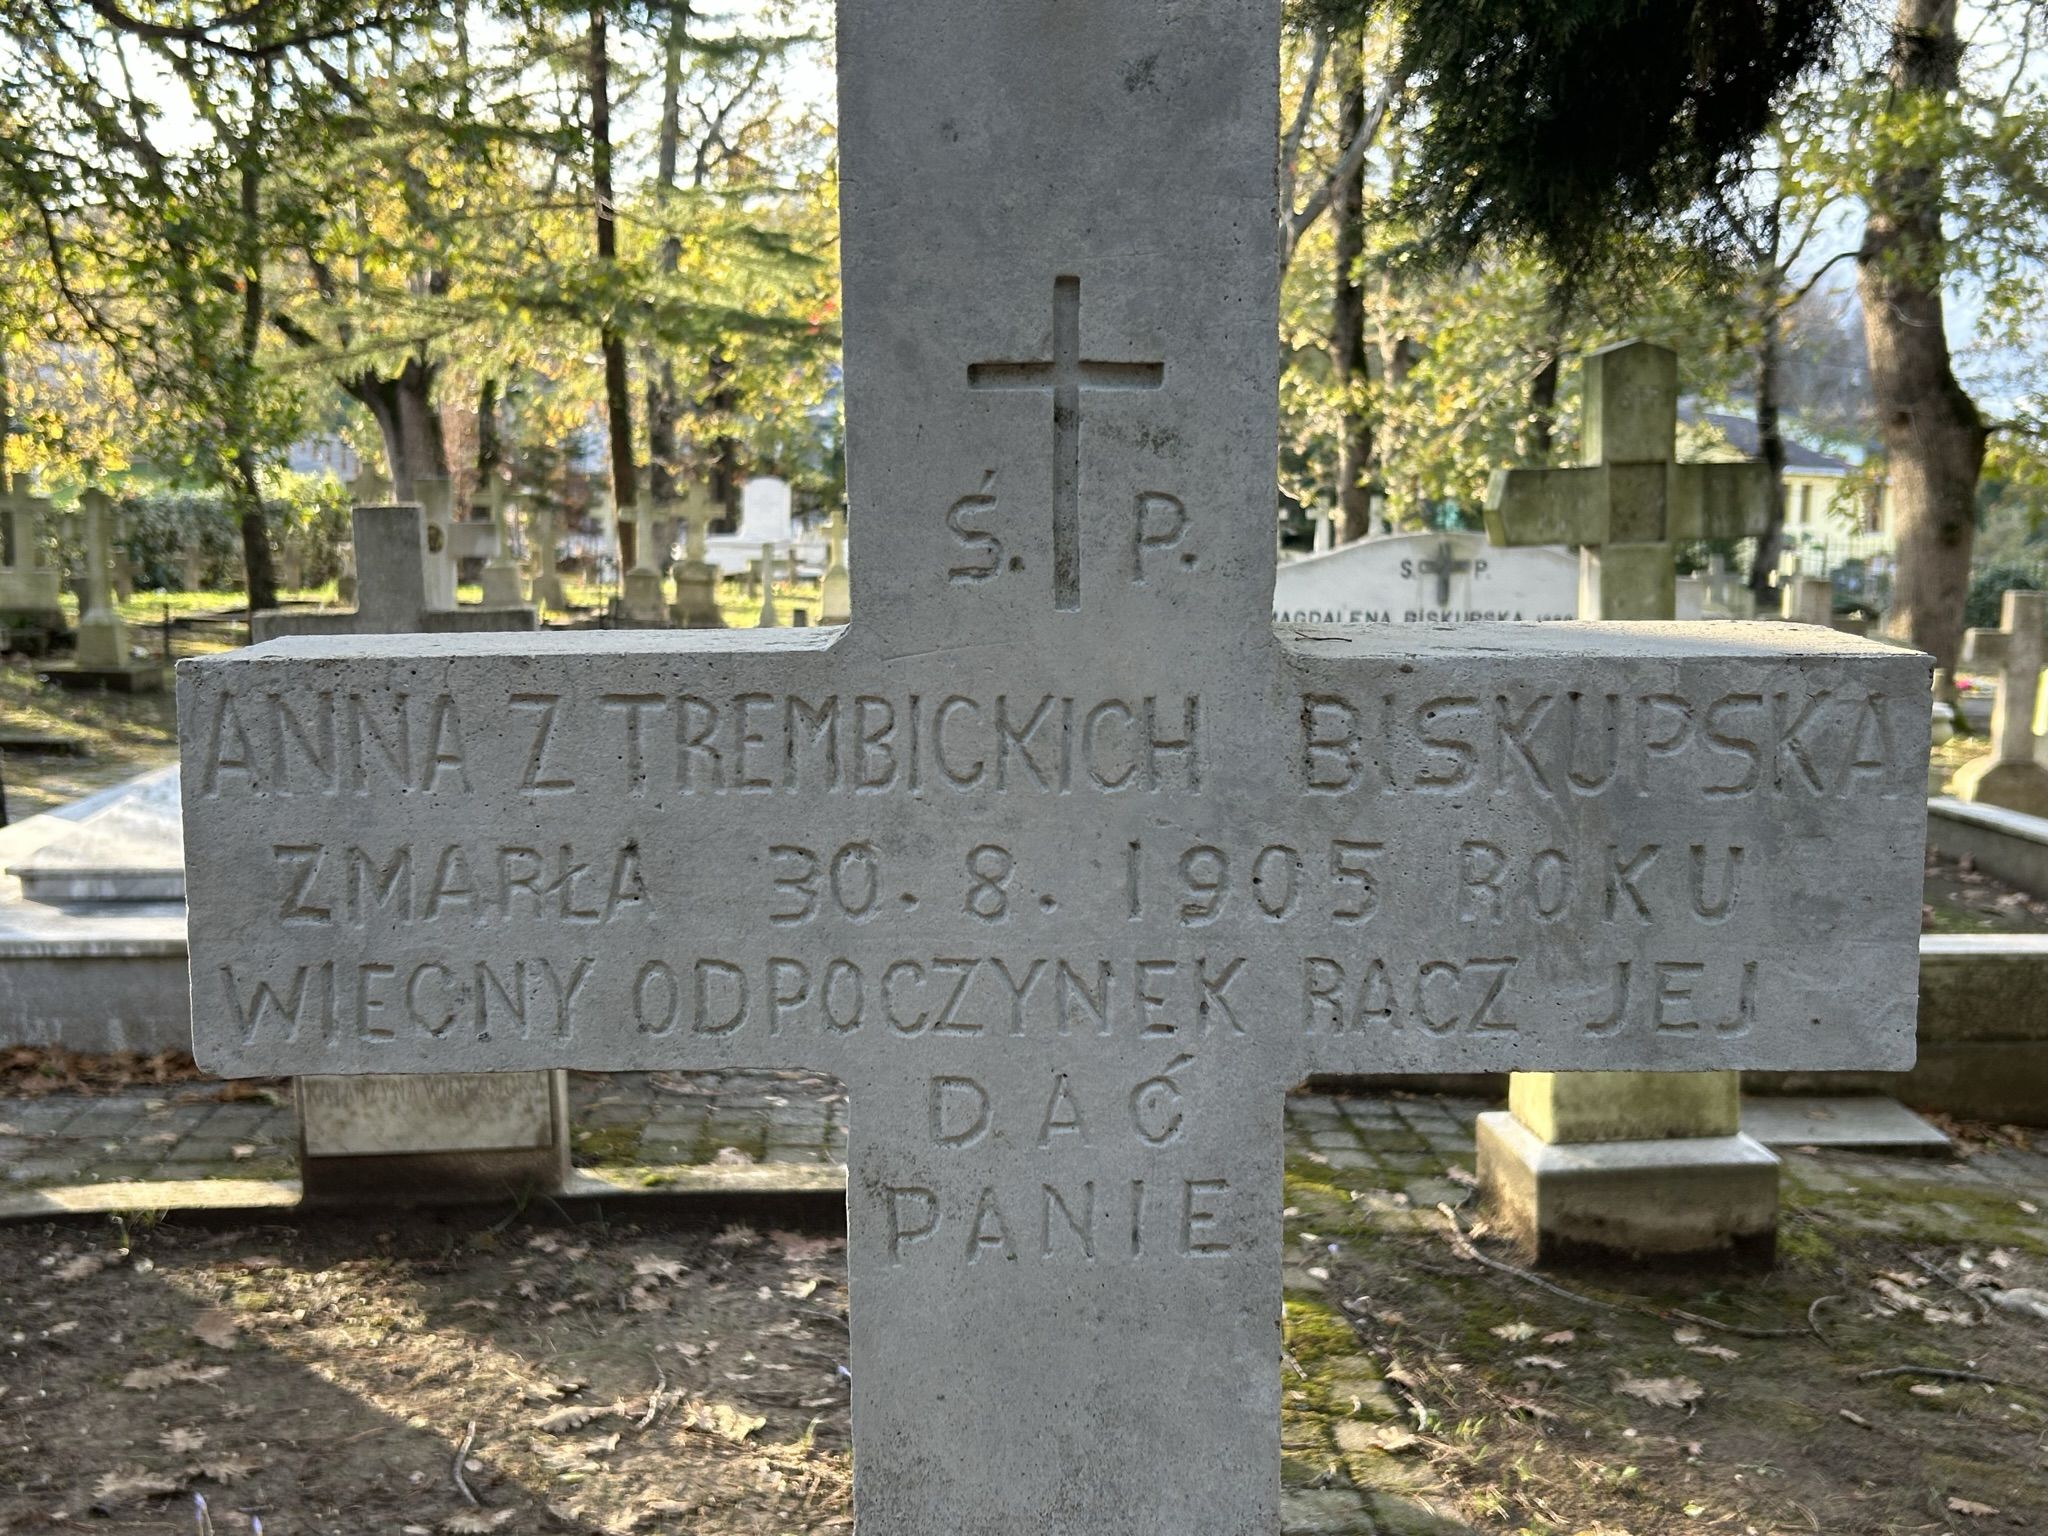 Inscription from the gravestone of Anna née Trembicka Biskupska, Catholic cemetery in Adampol